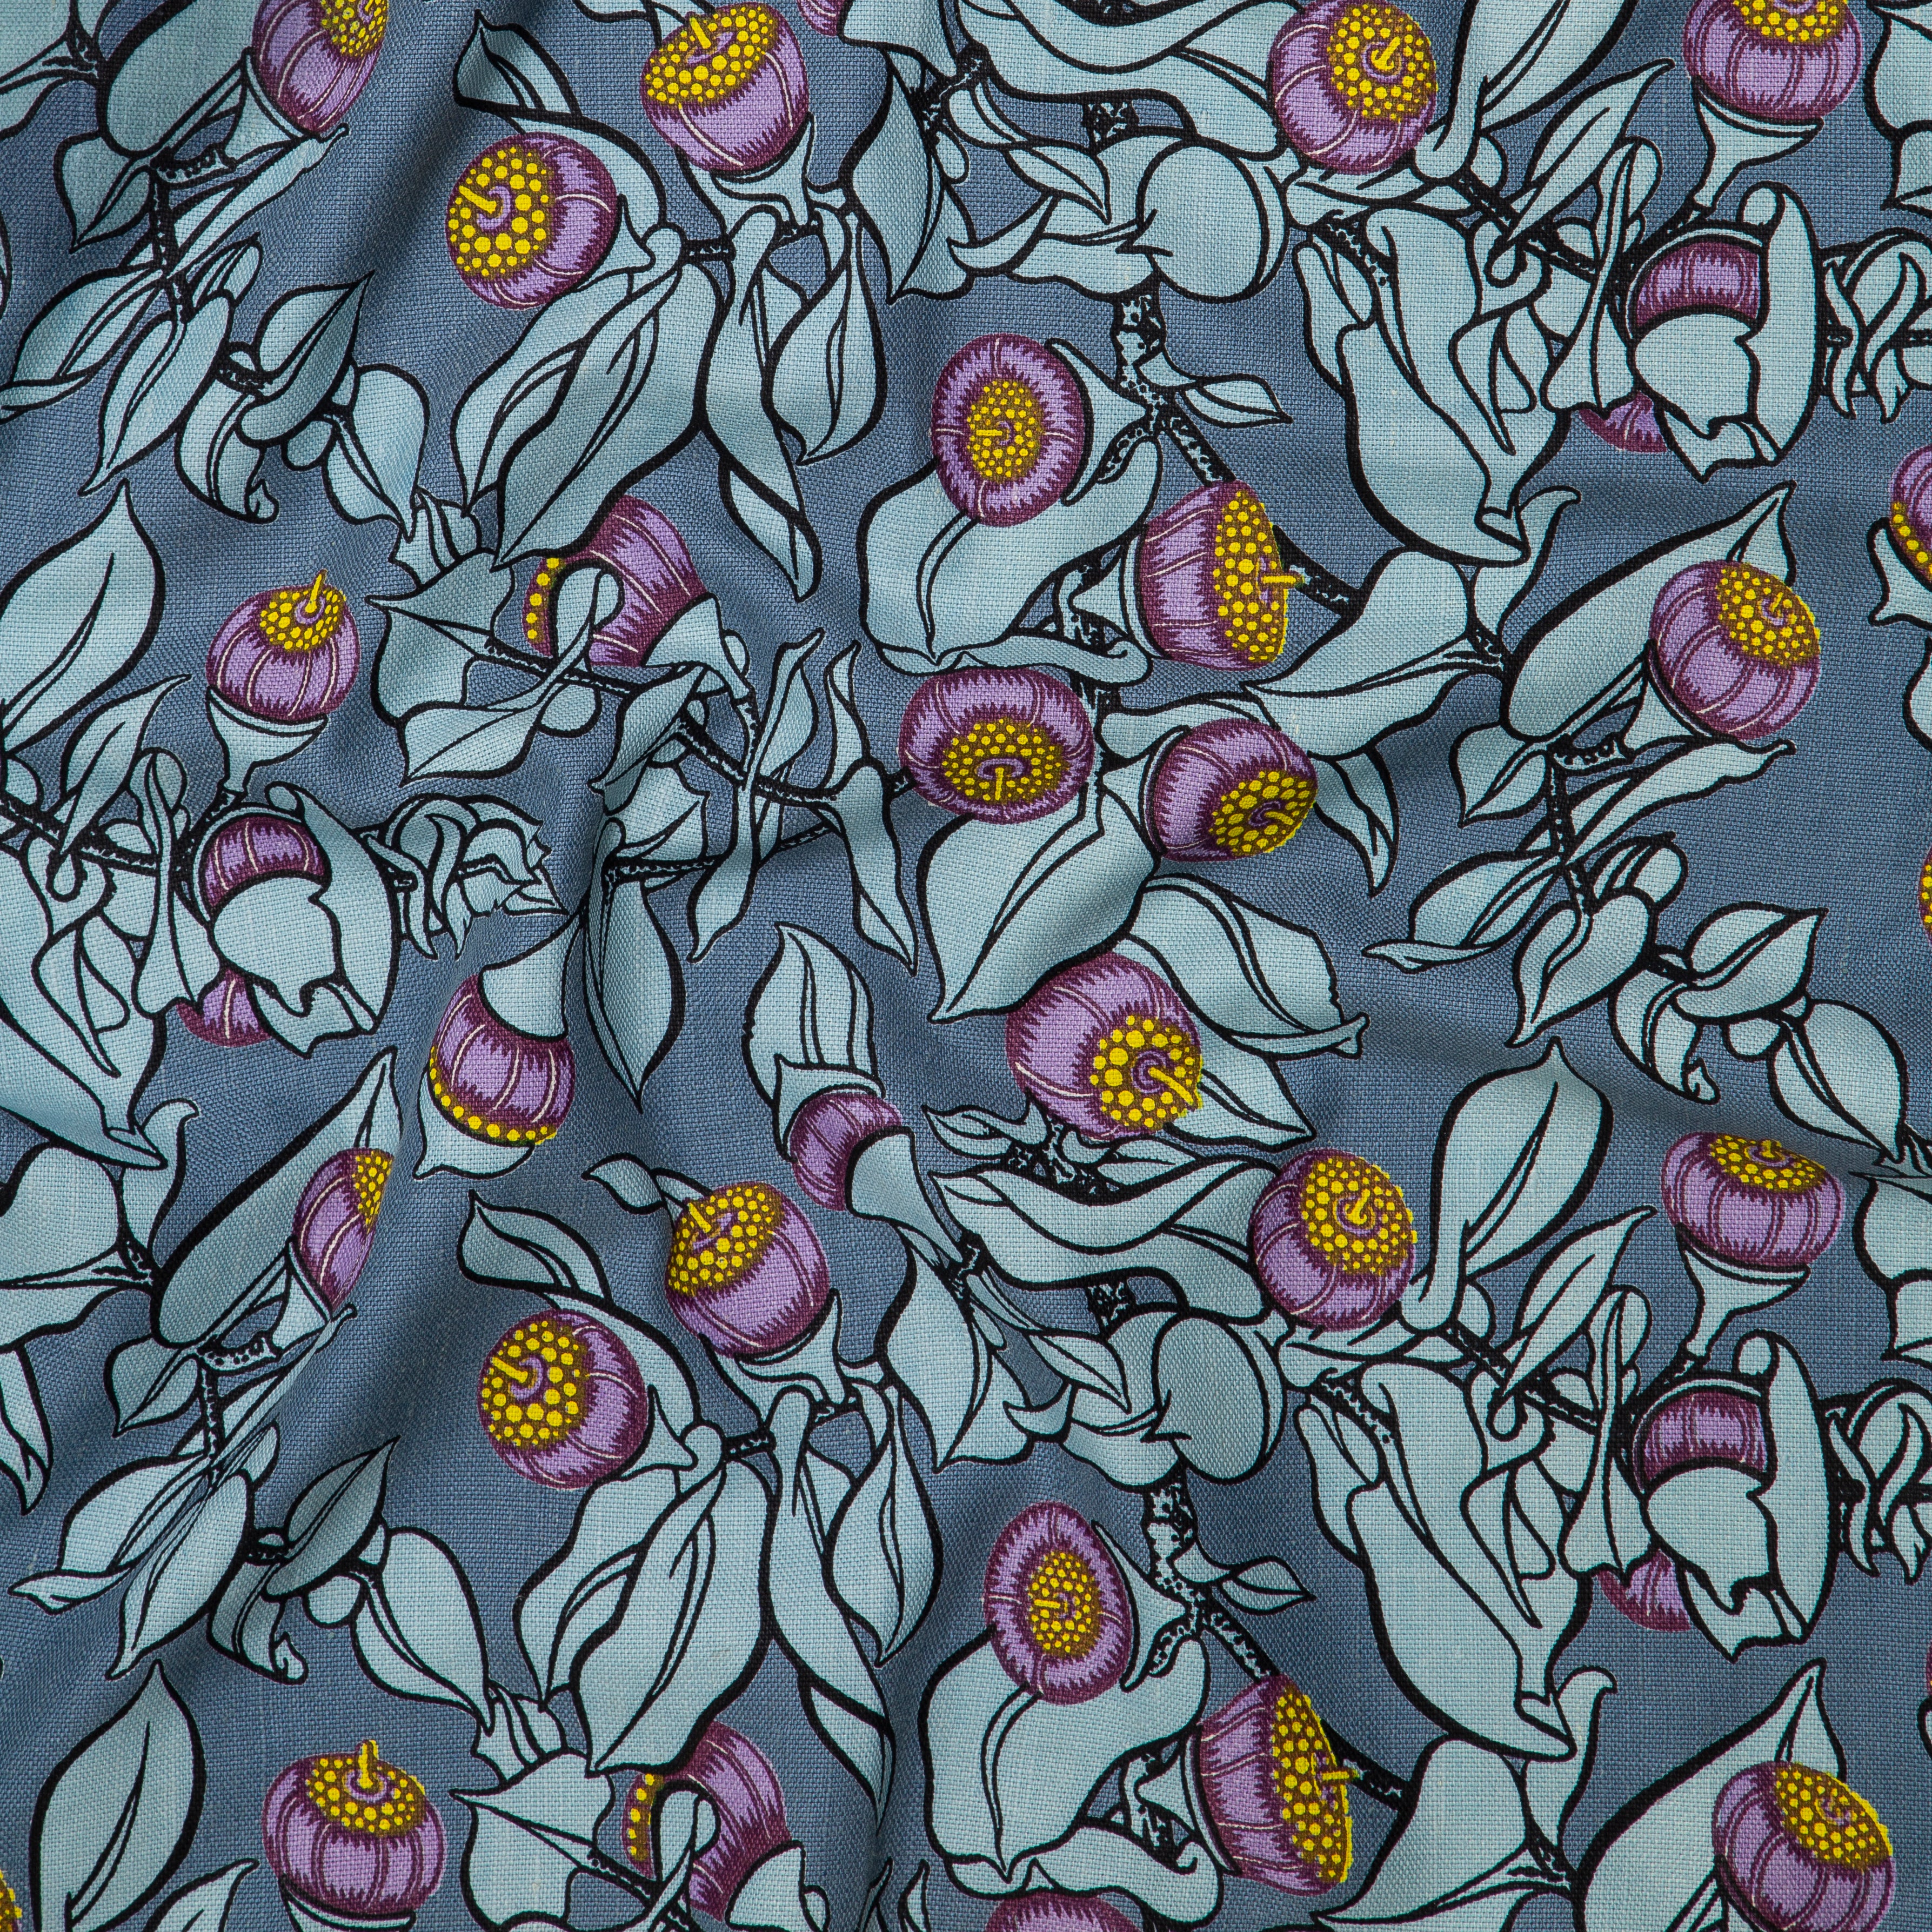 Draped fabric in a leaf and bud print in shades of blue, purple and yellow on a navy field.